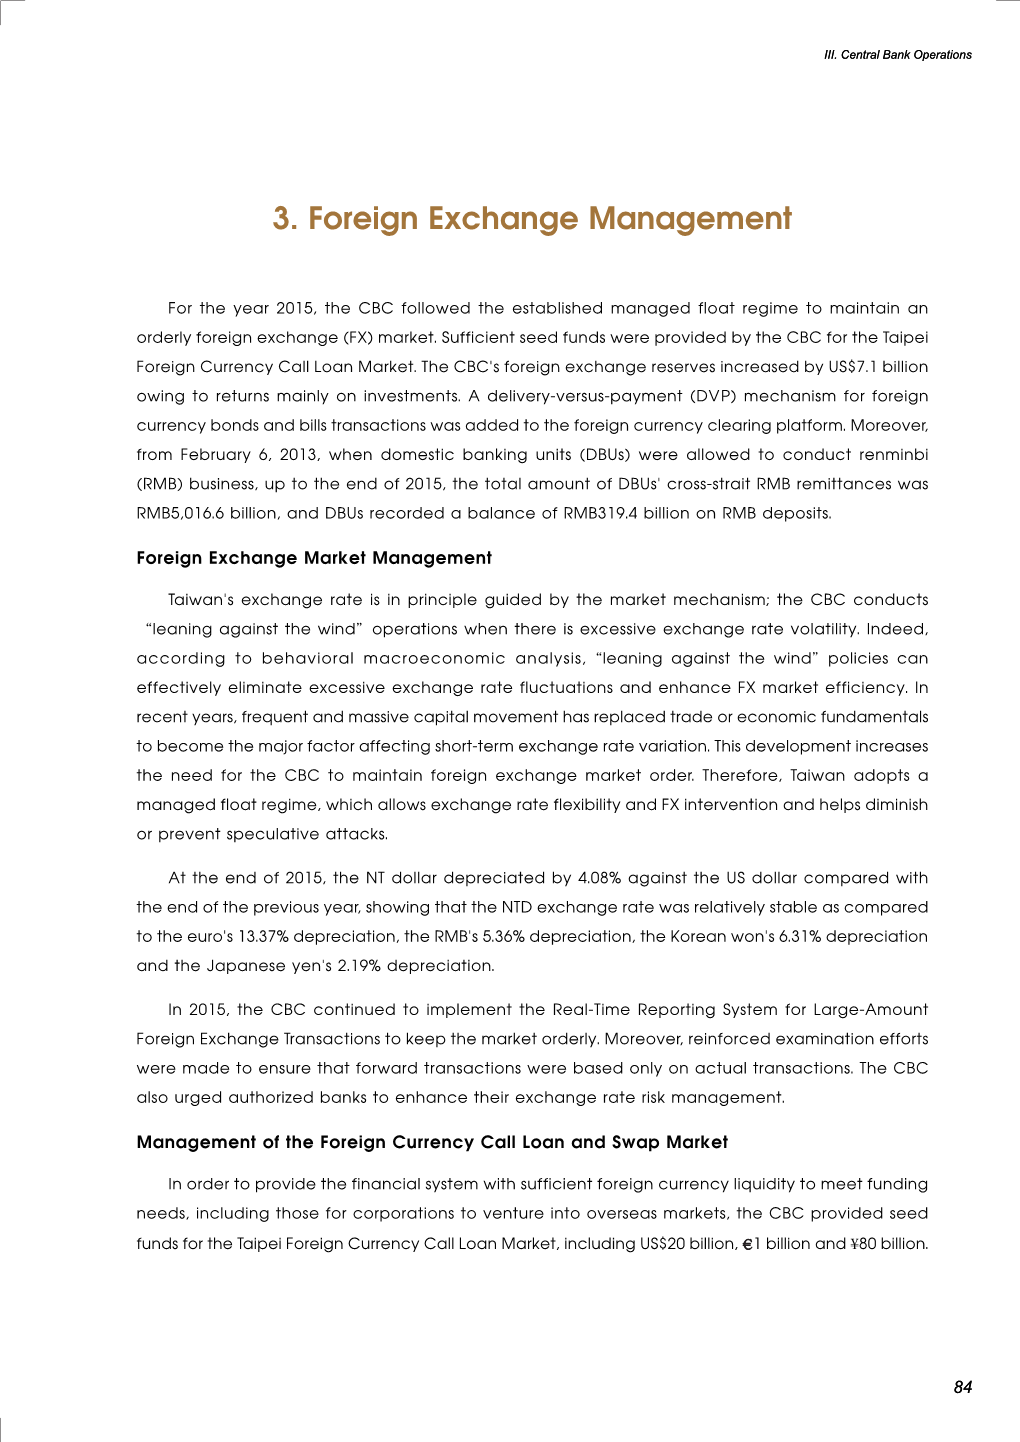 3. Foreign Exchange Management